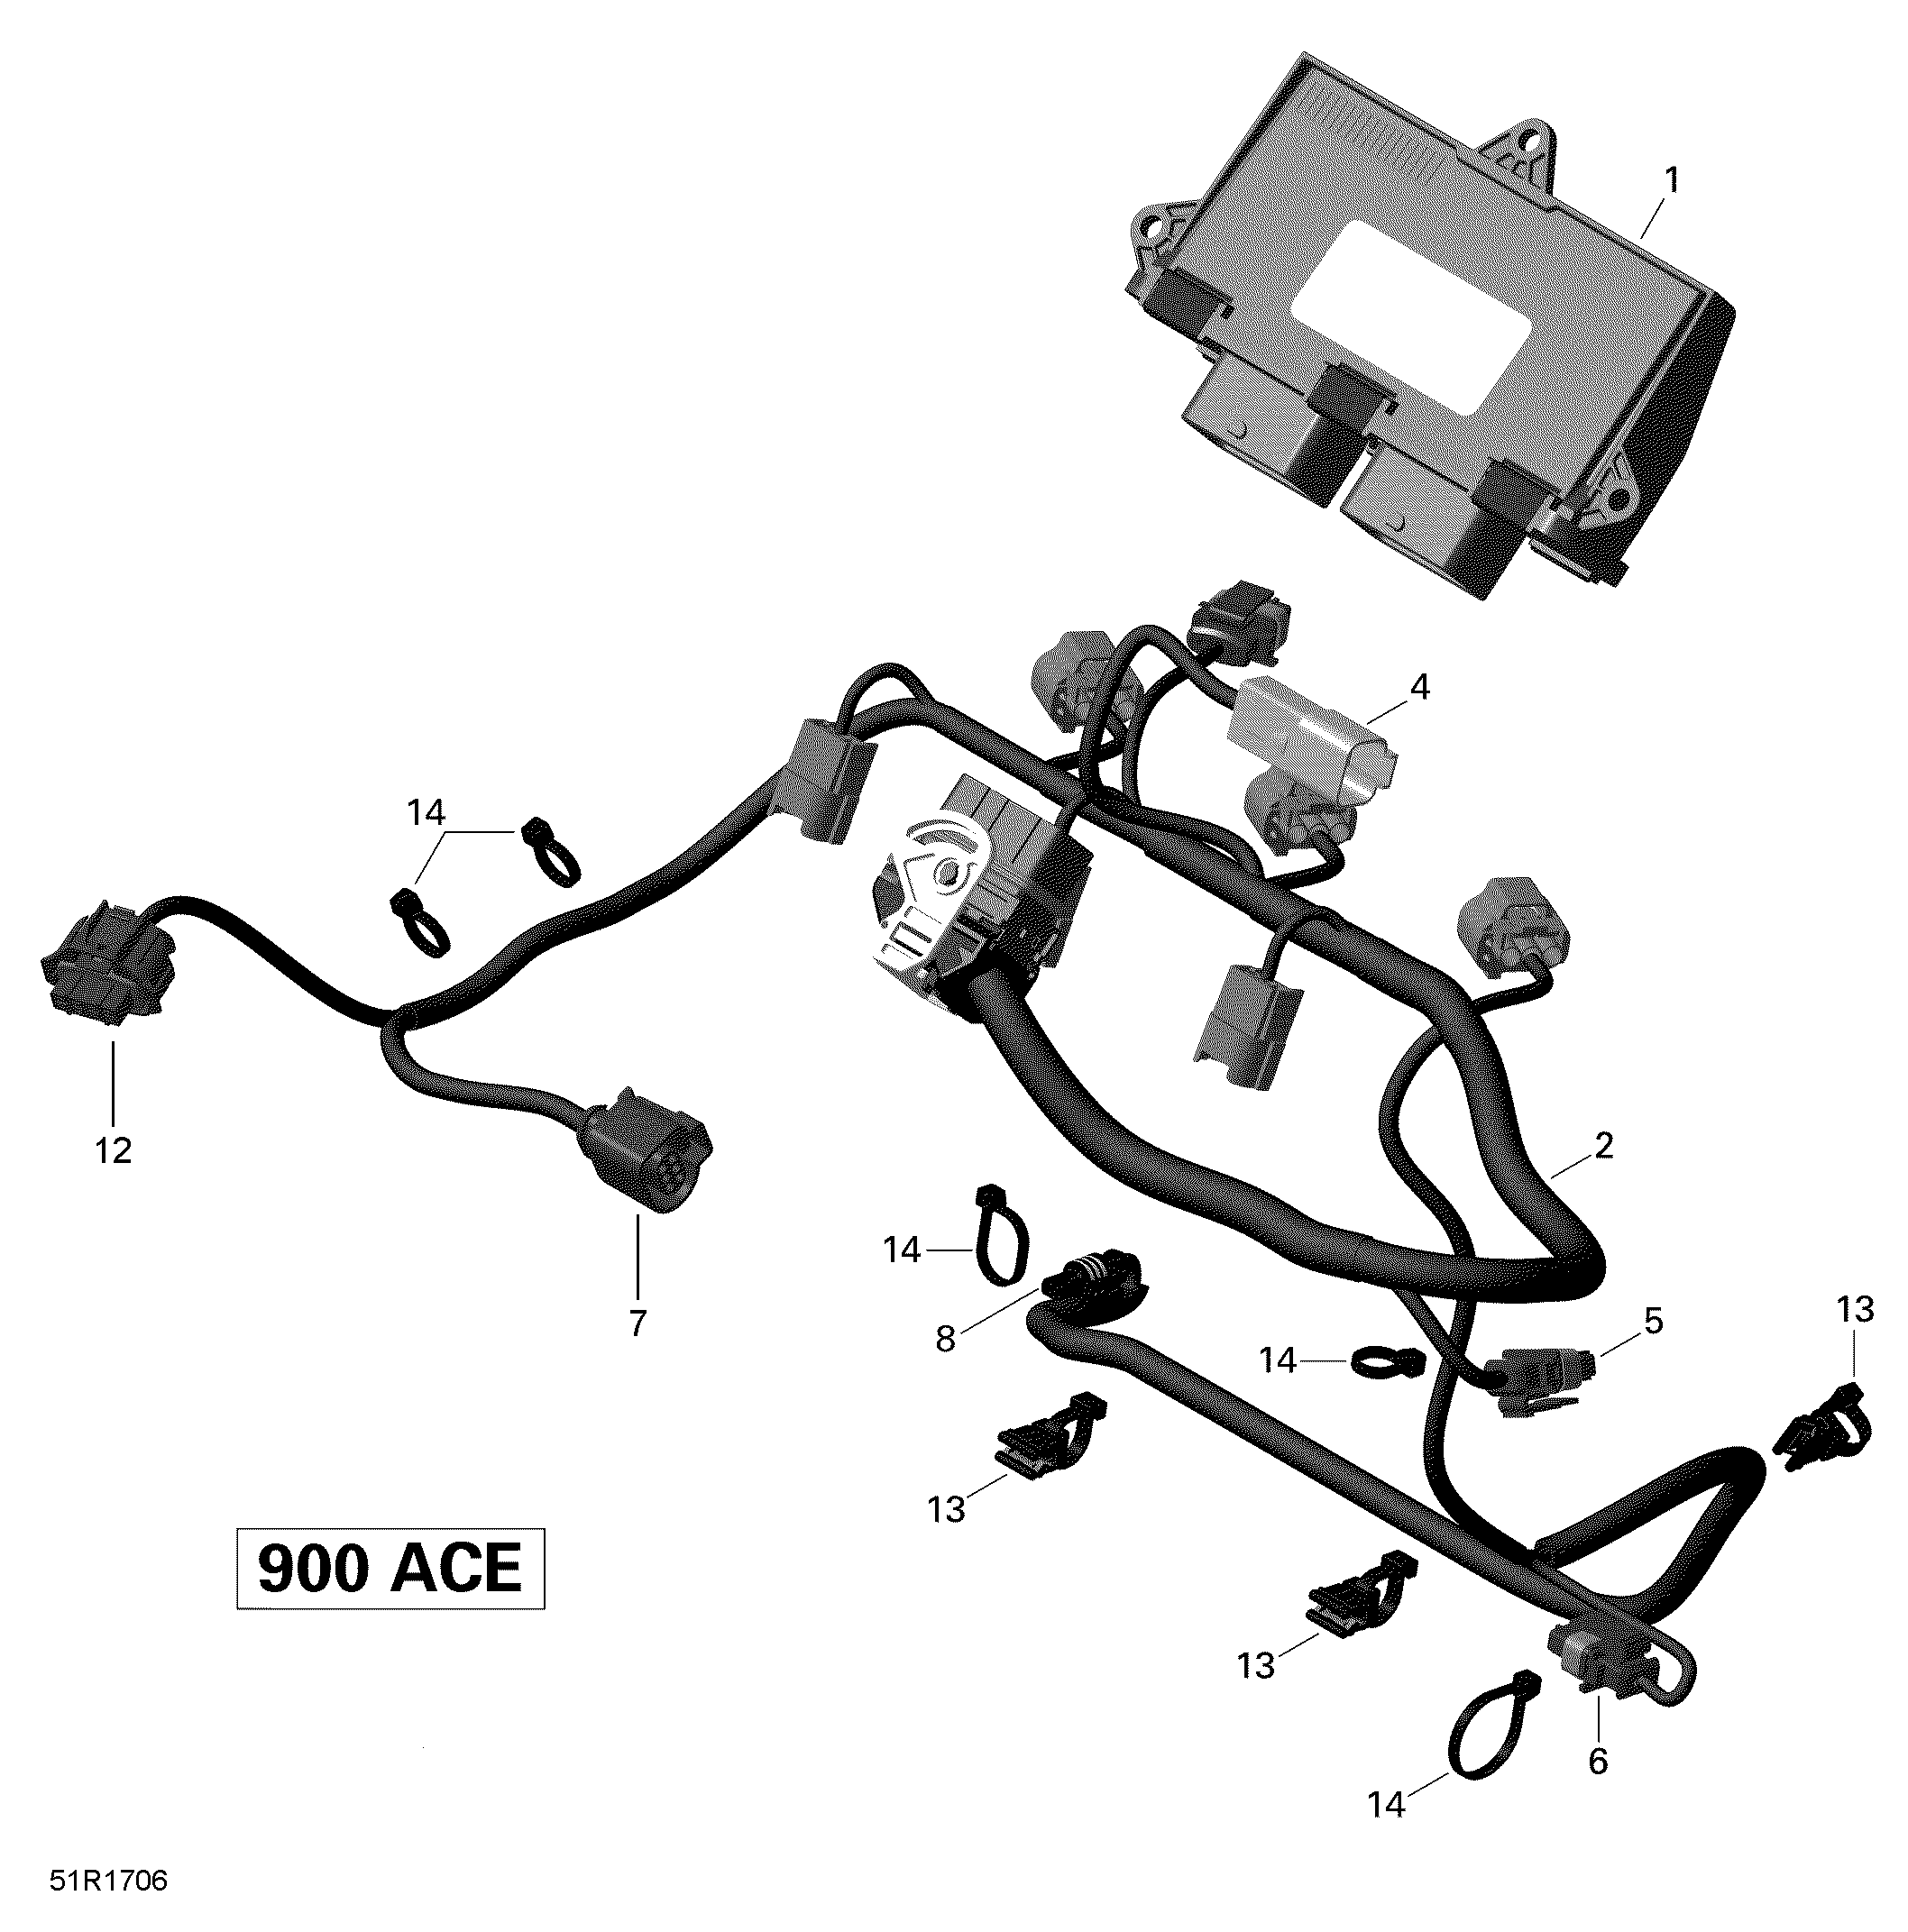 Engine Harness and Electronic Module - 900 ACE